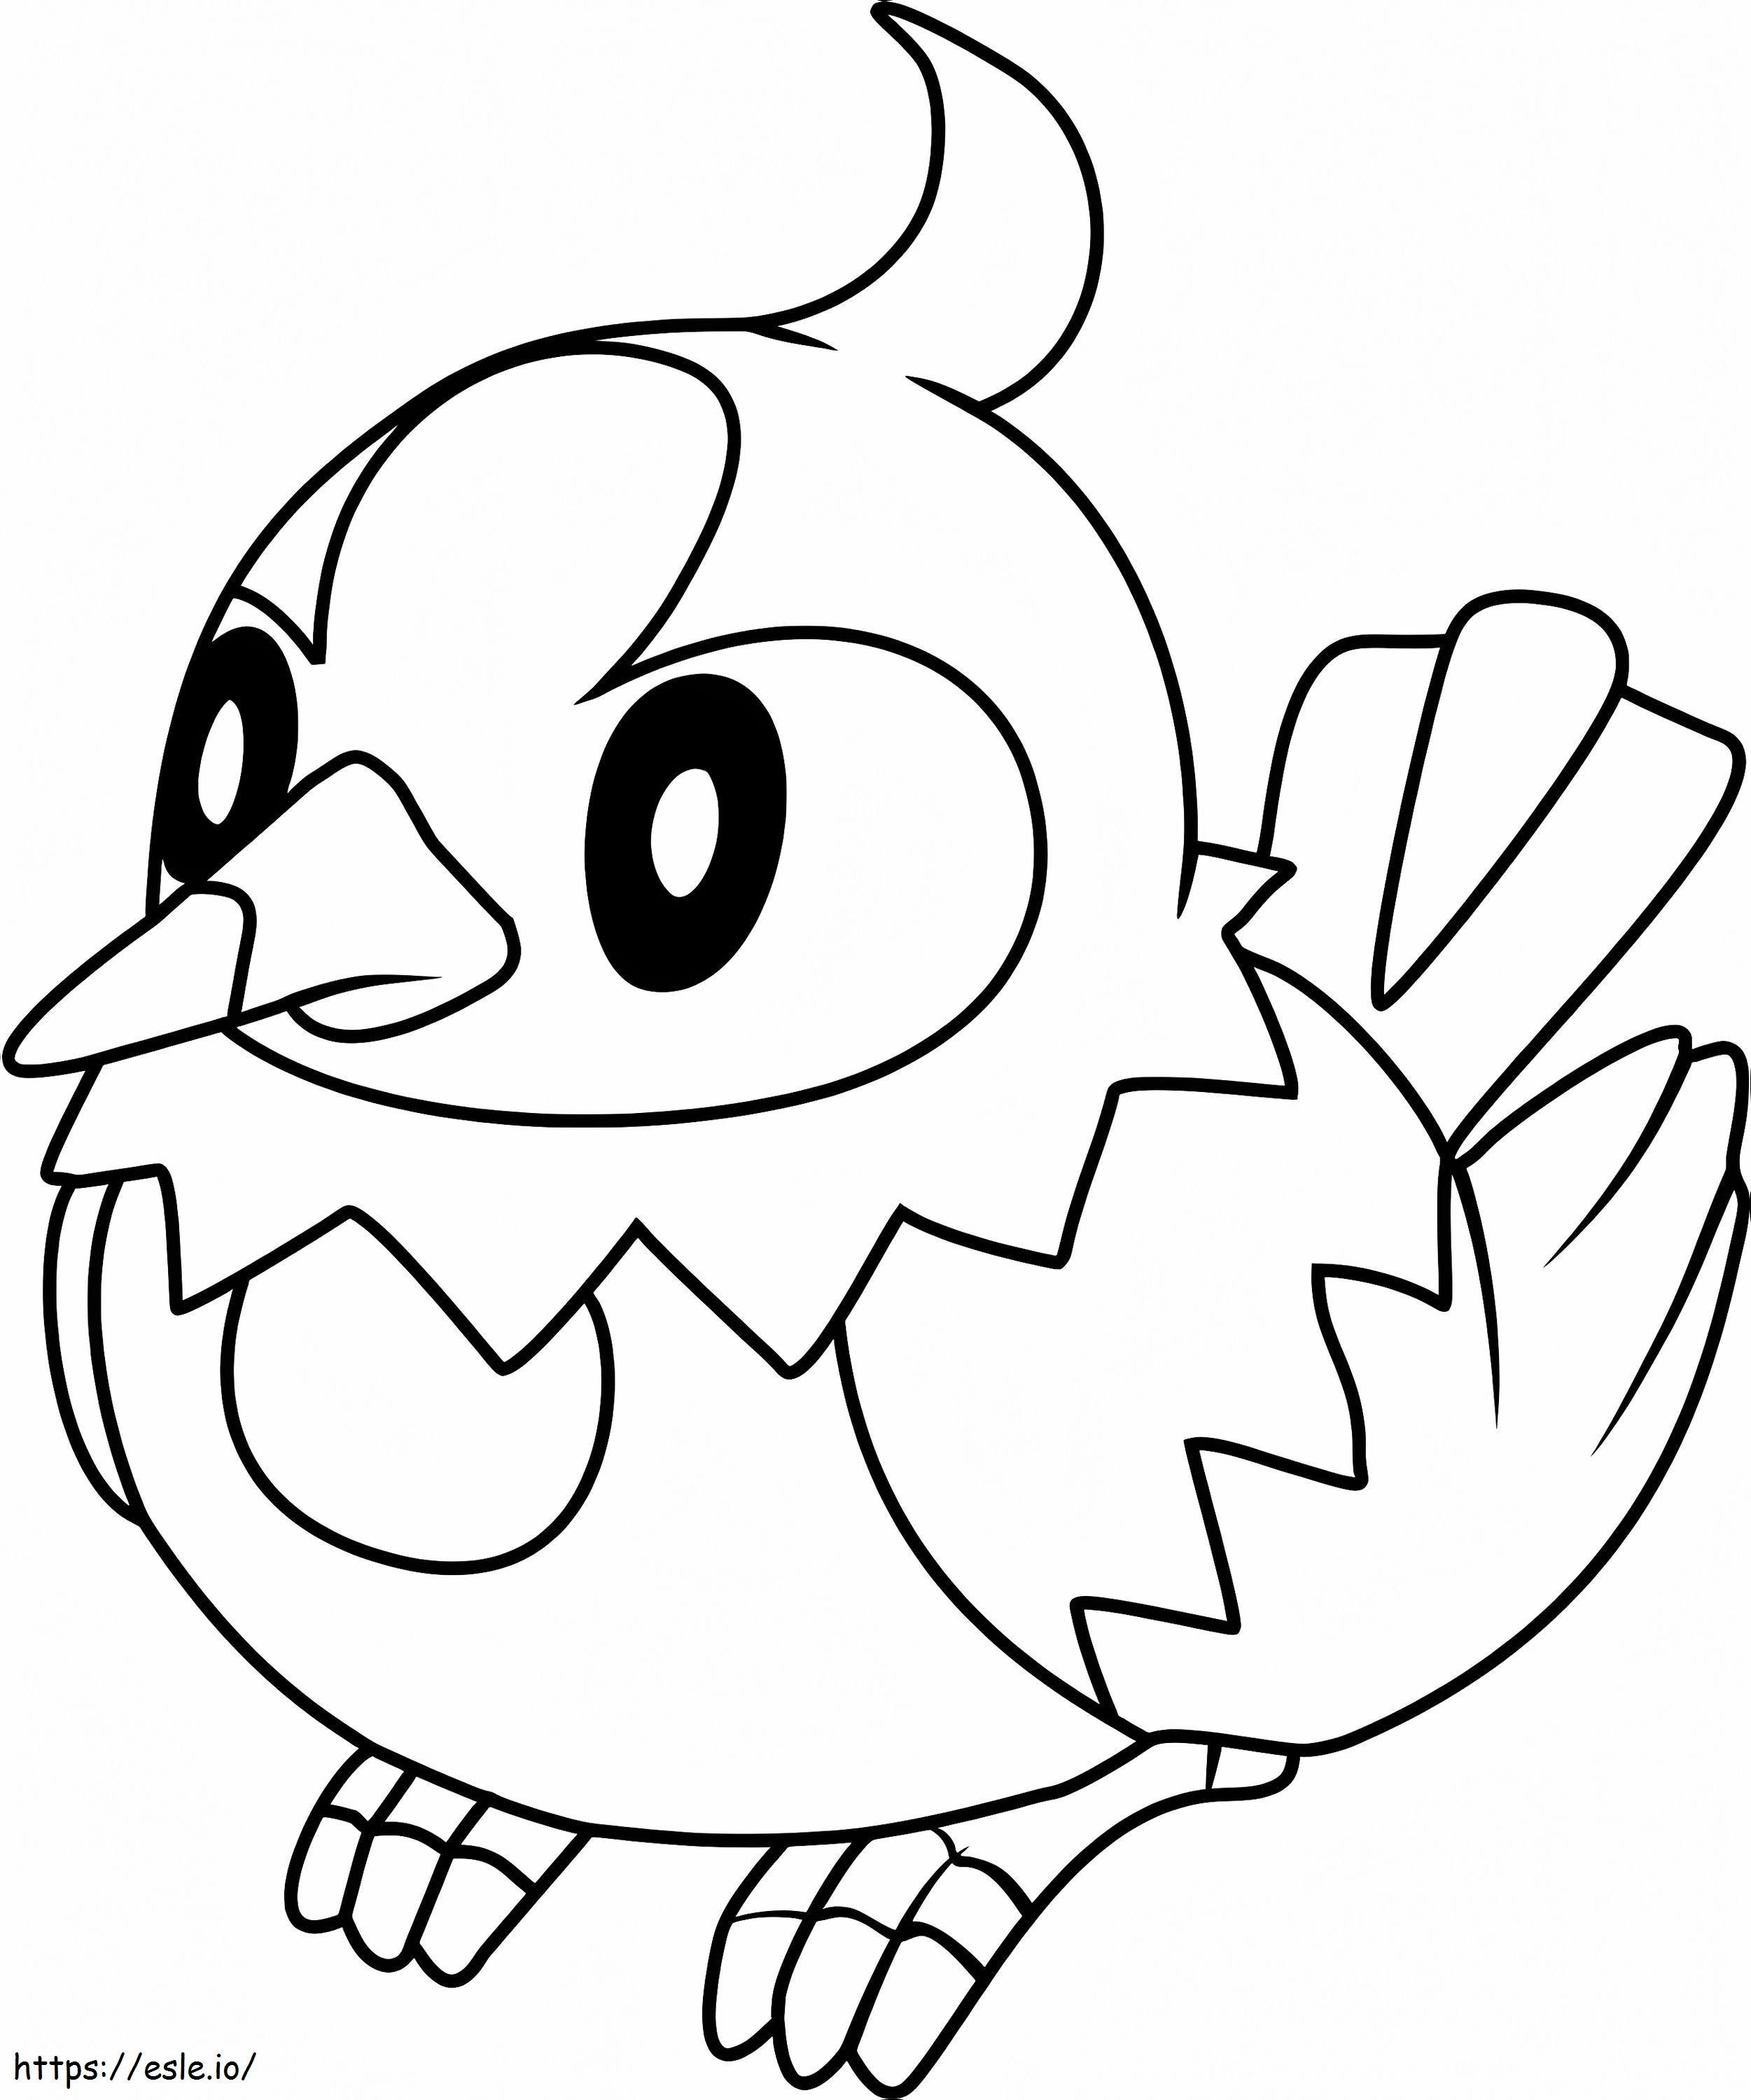 Starly Pokemon coloring page